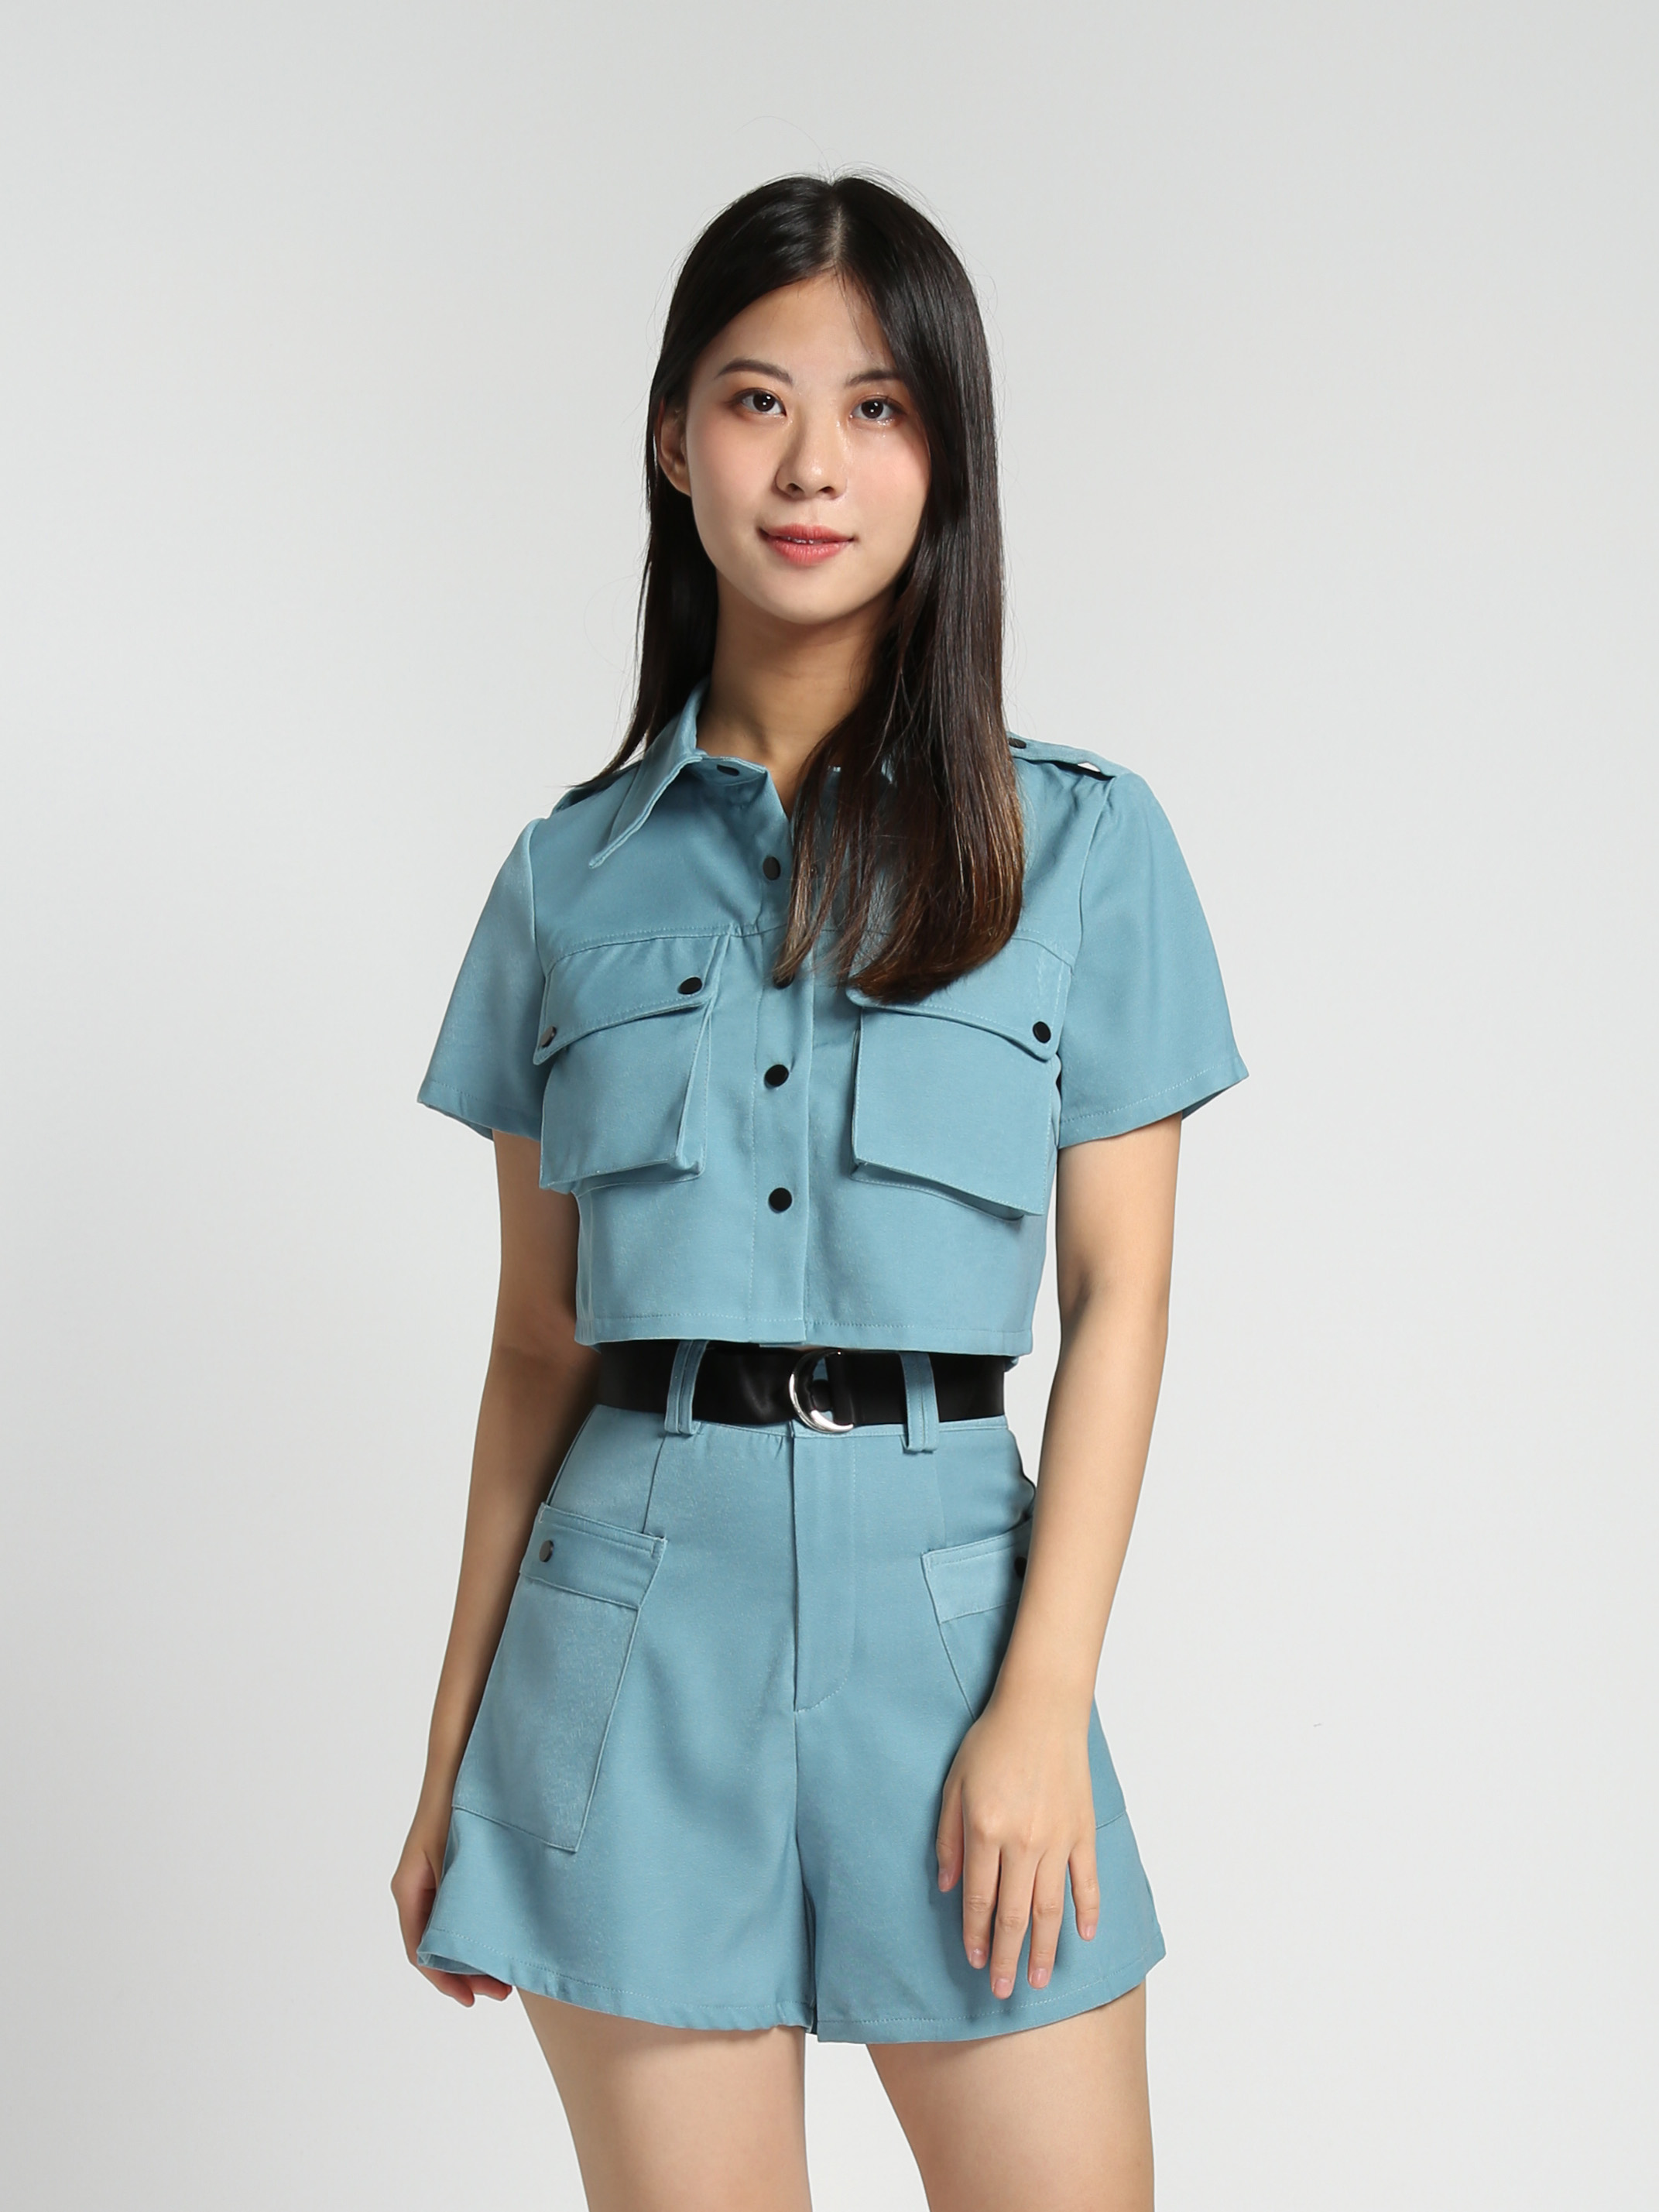 Short Sleeve Front Button Top With Side Pocket Short Pants With Belt Set 27841